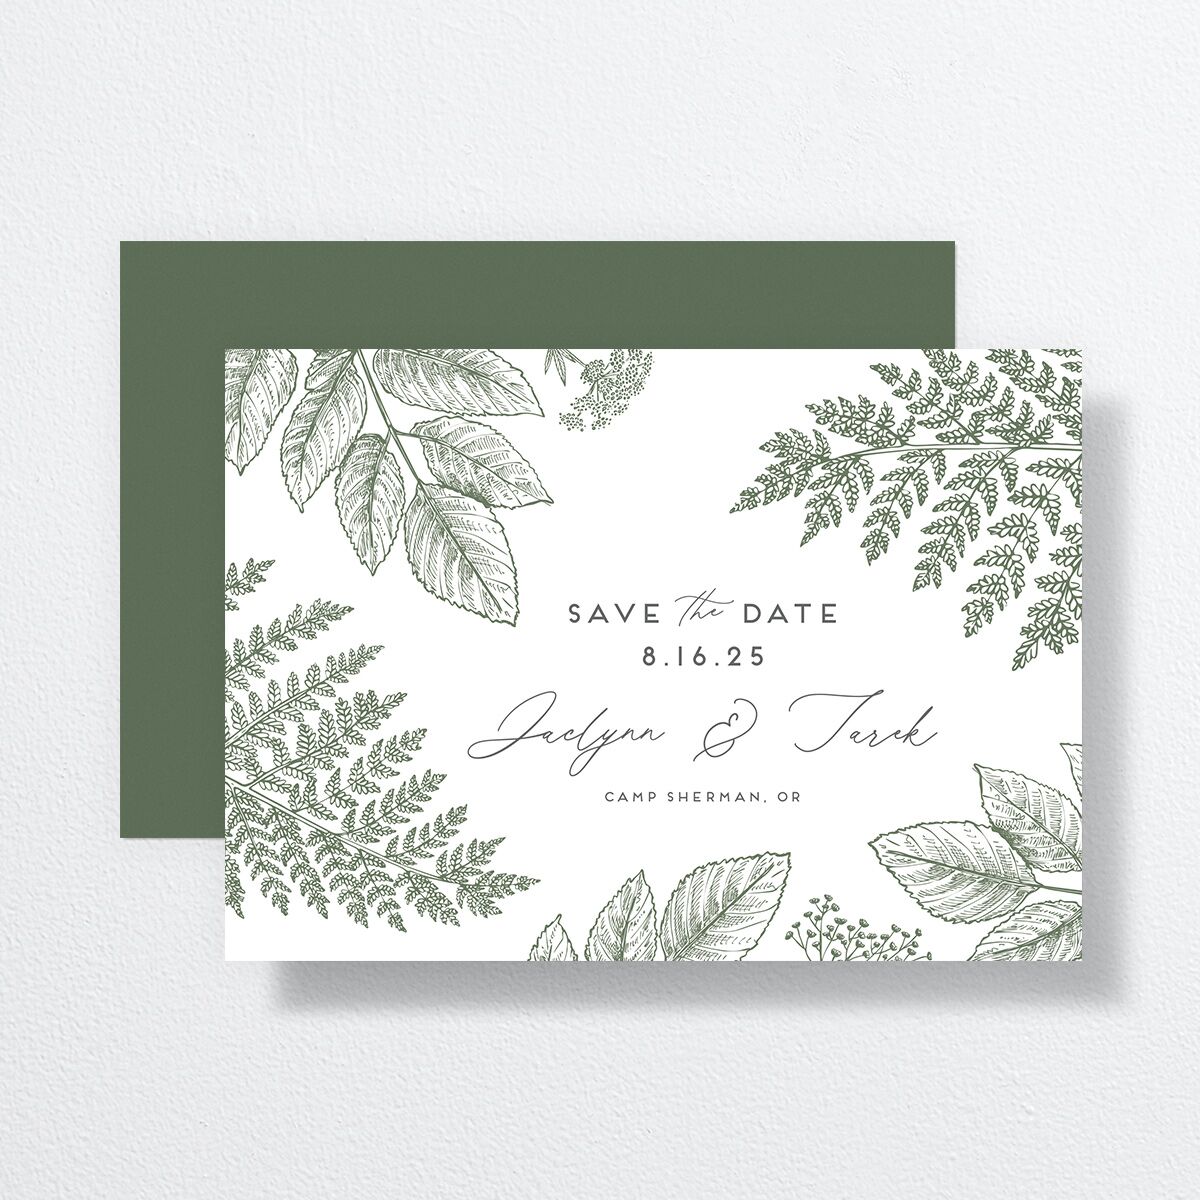 Botanical Frame Save The Date Cards front-and-back in green